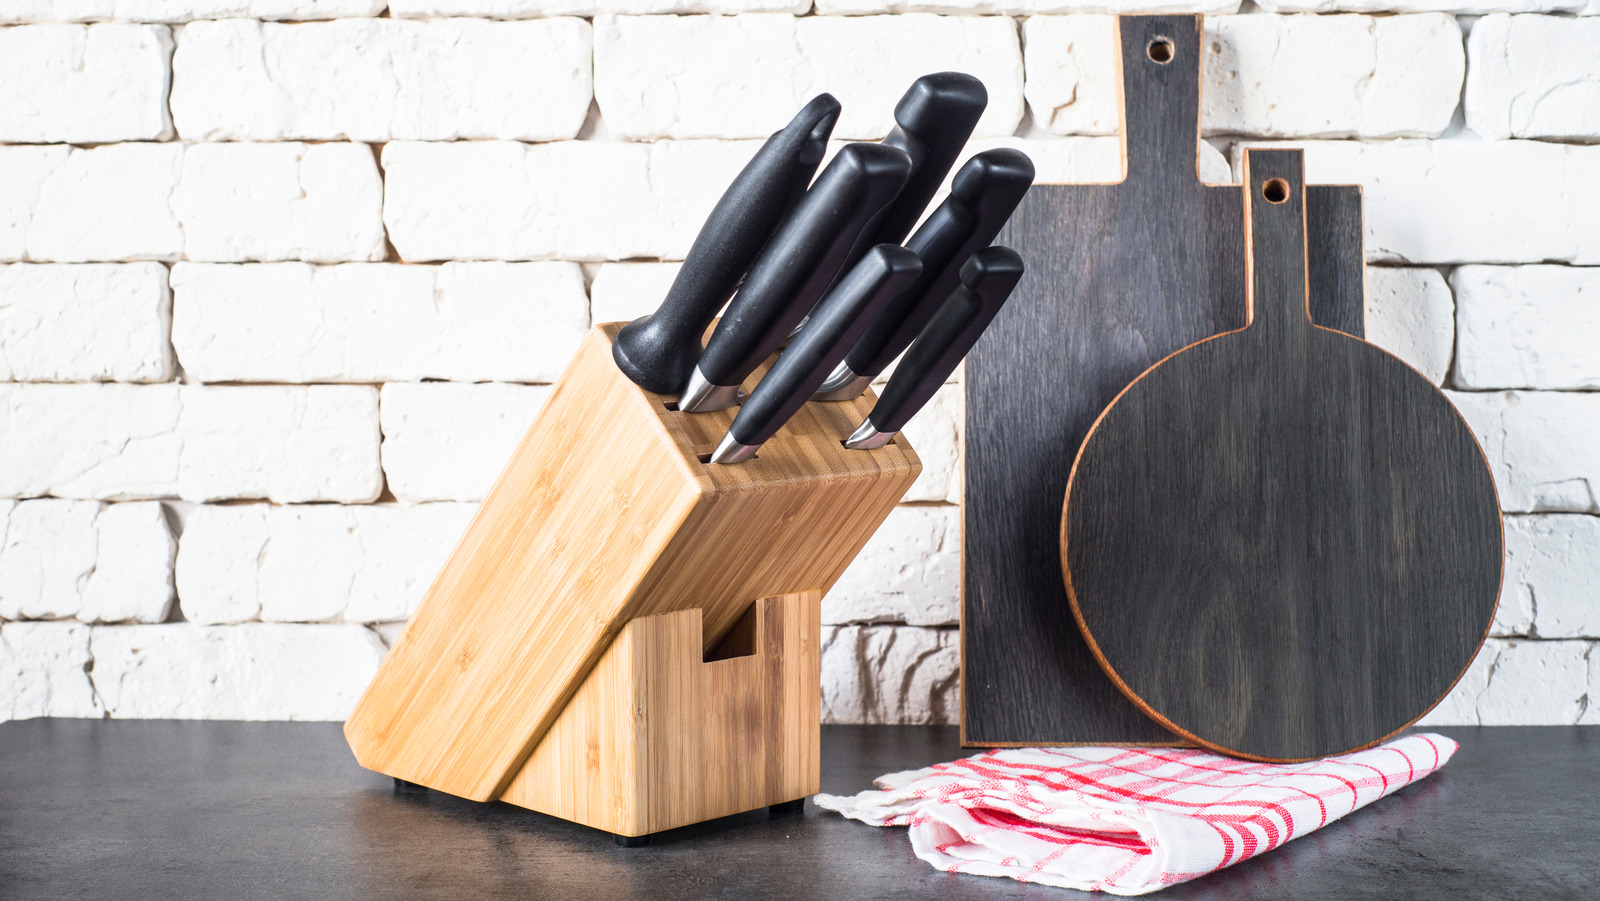 Your Kitchen Knives Don't Need to Come as a Set - Eater